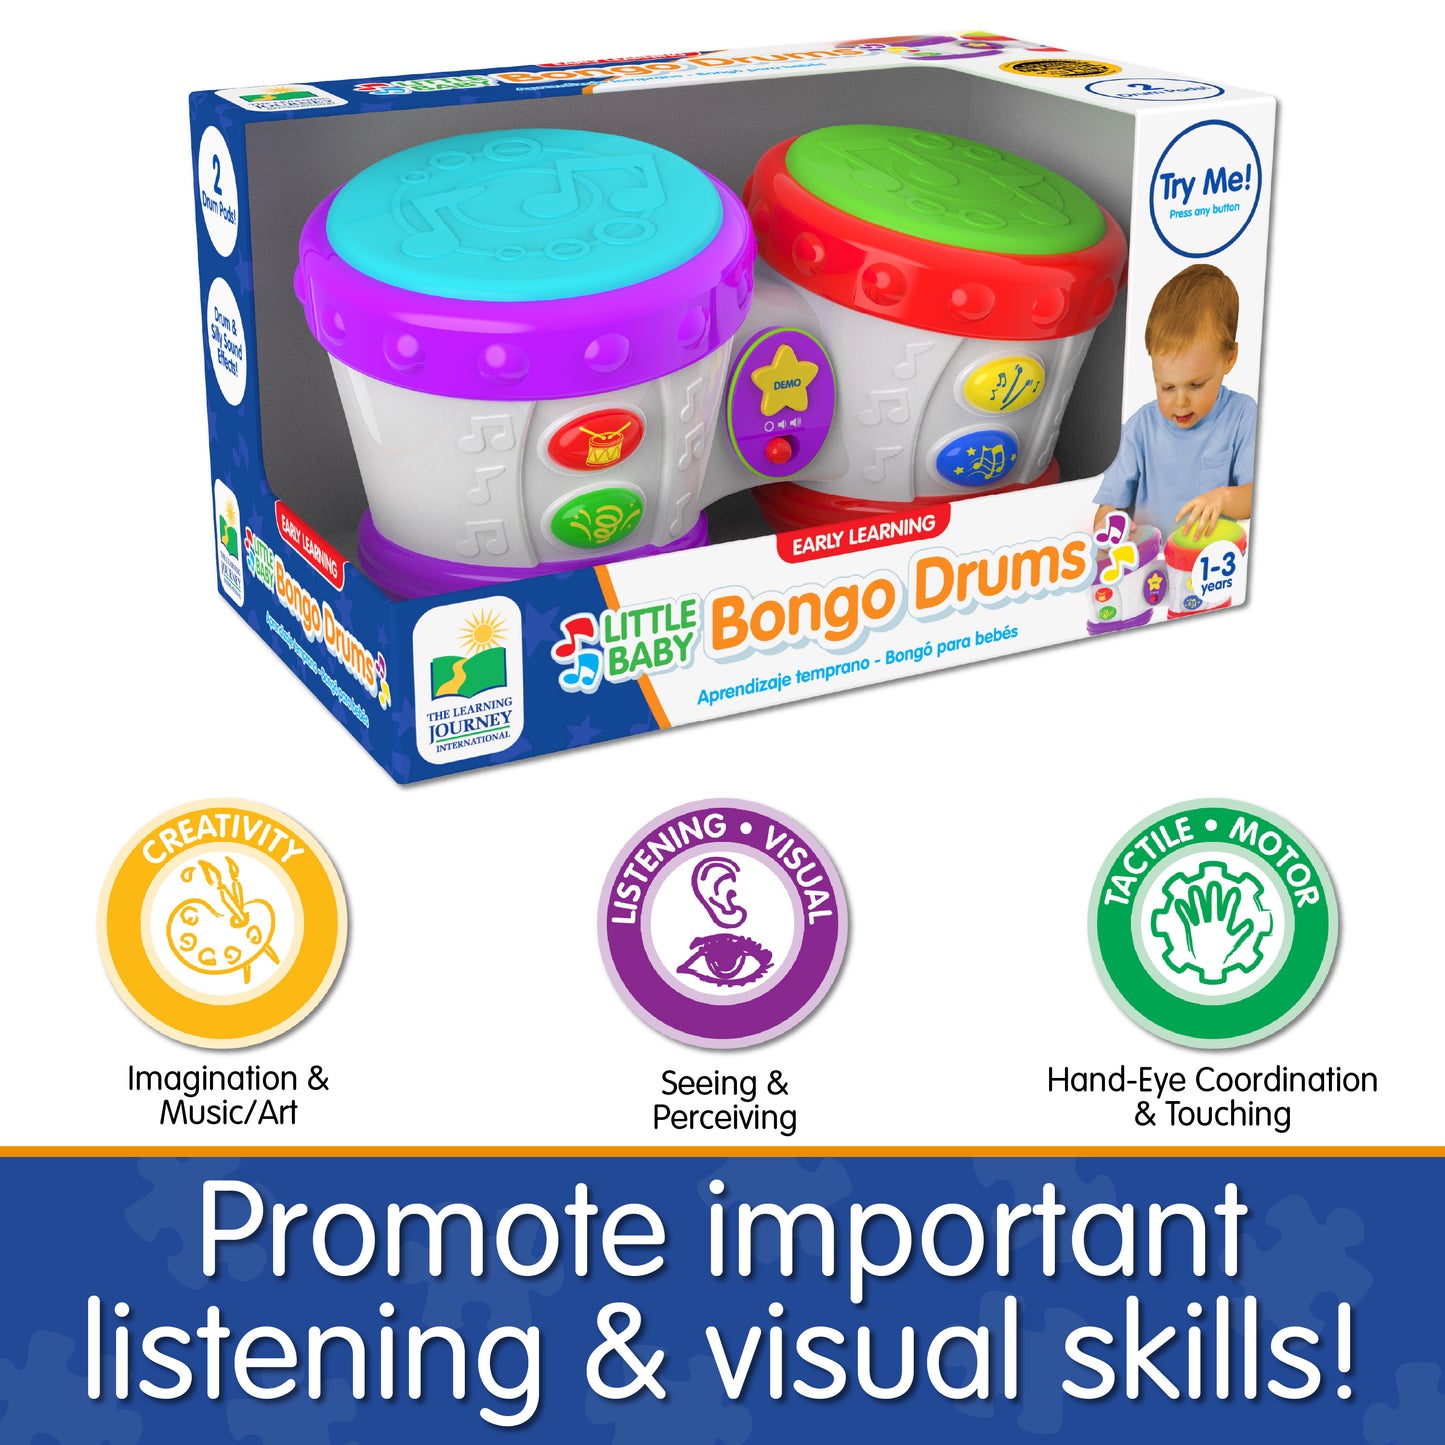 Infographic of Little Baby Bongo Drums's educational benefits that says, "Promote important listening and visual skills!"